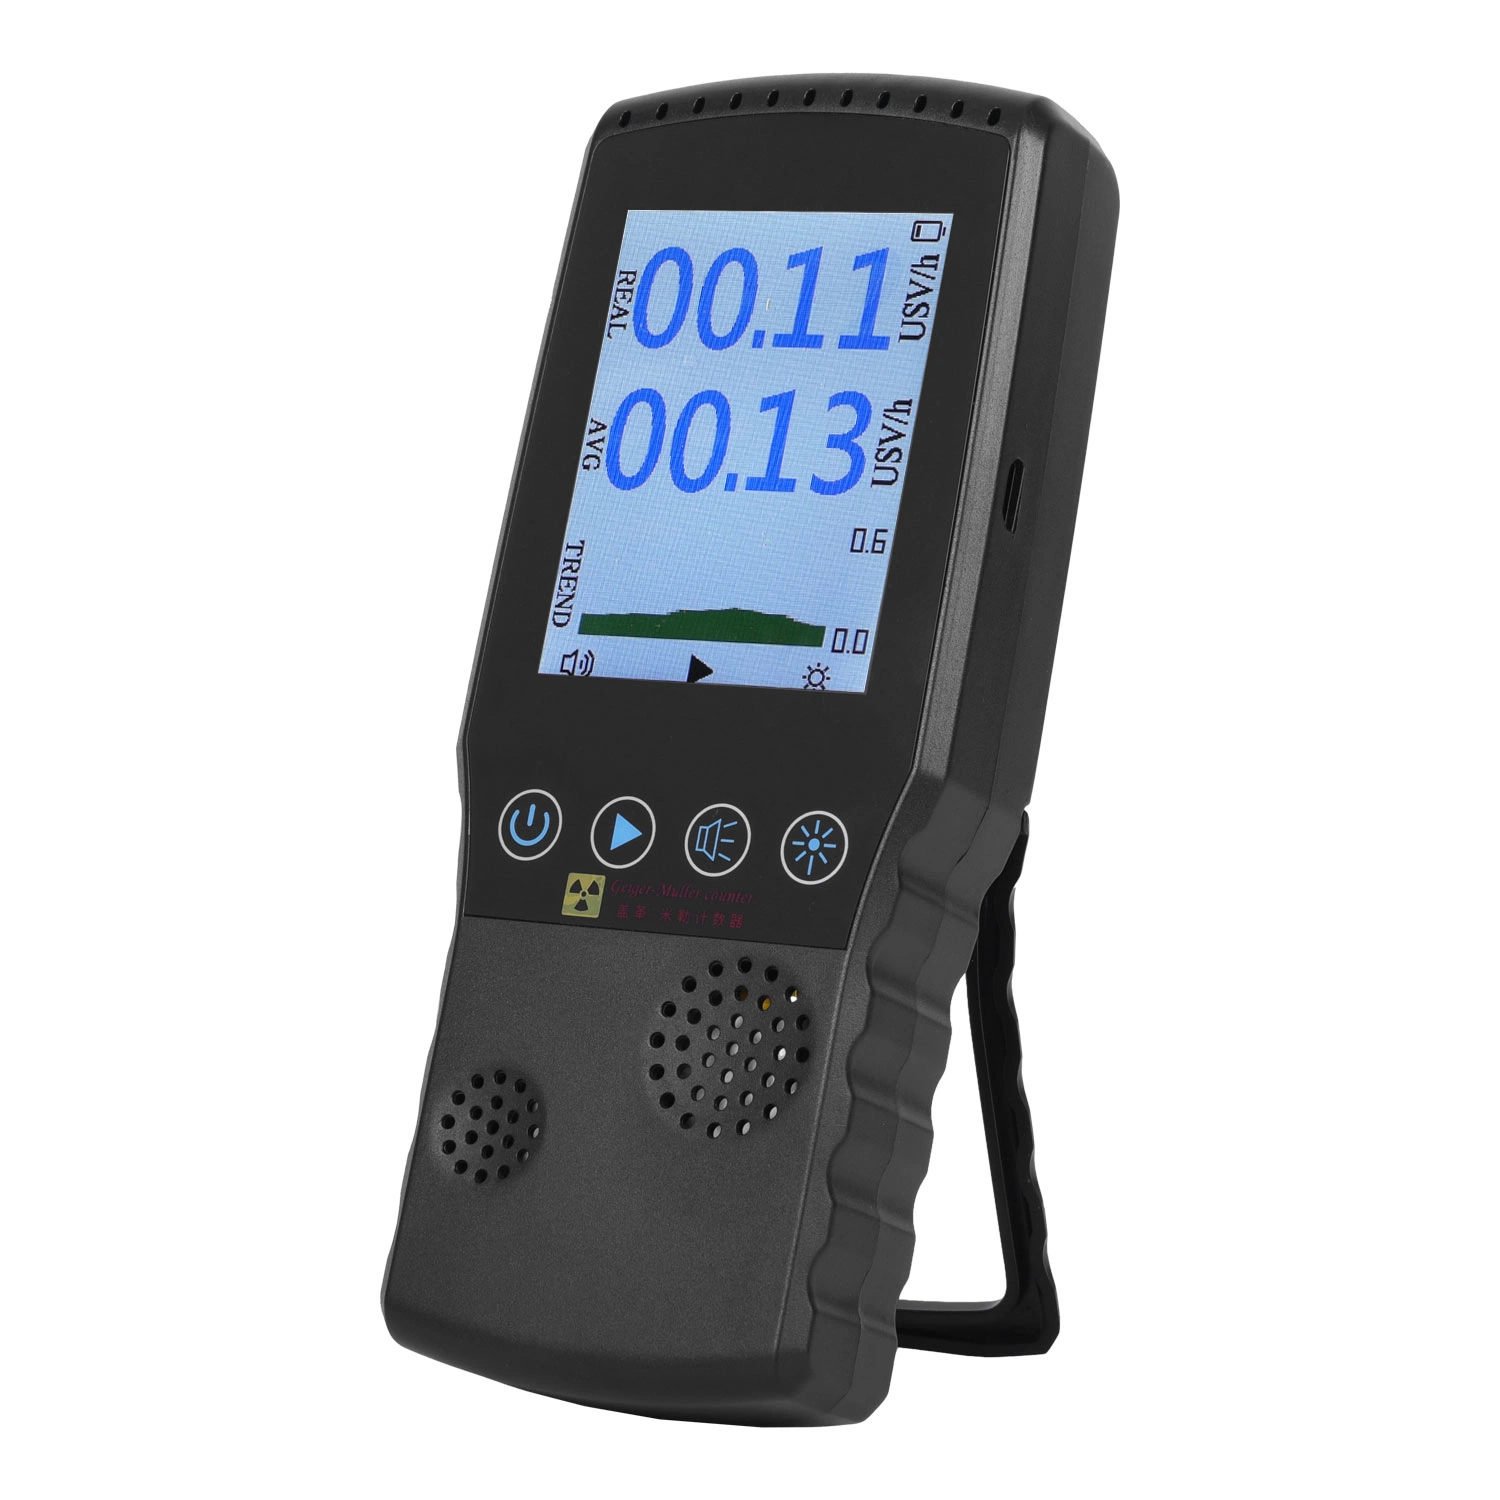 2023 Geiger Counter Nuclear Food Radiation Meter Beta Gamma X-ray Tester Radioactive Detector TFT Display Dosimeter Tester Radiometer for Radiation Measurement